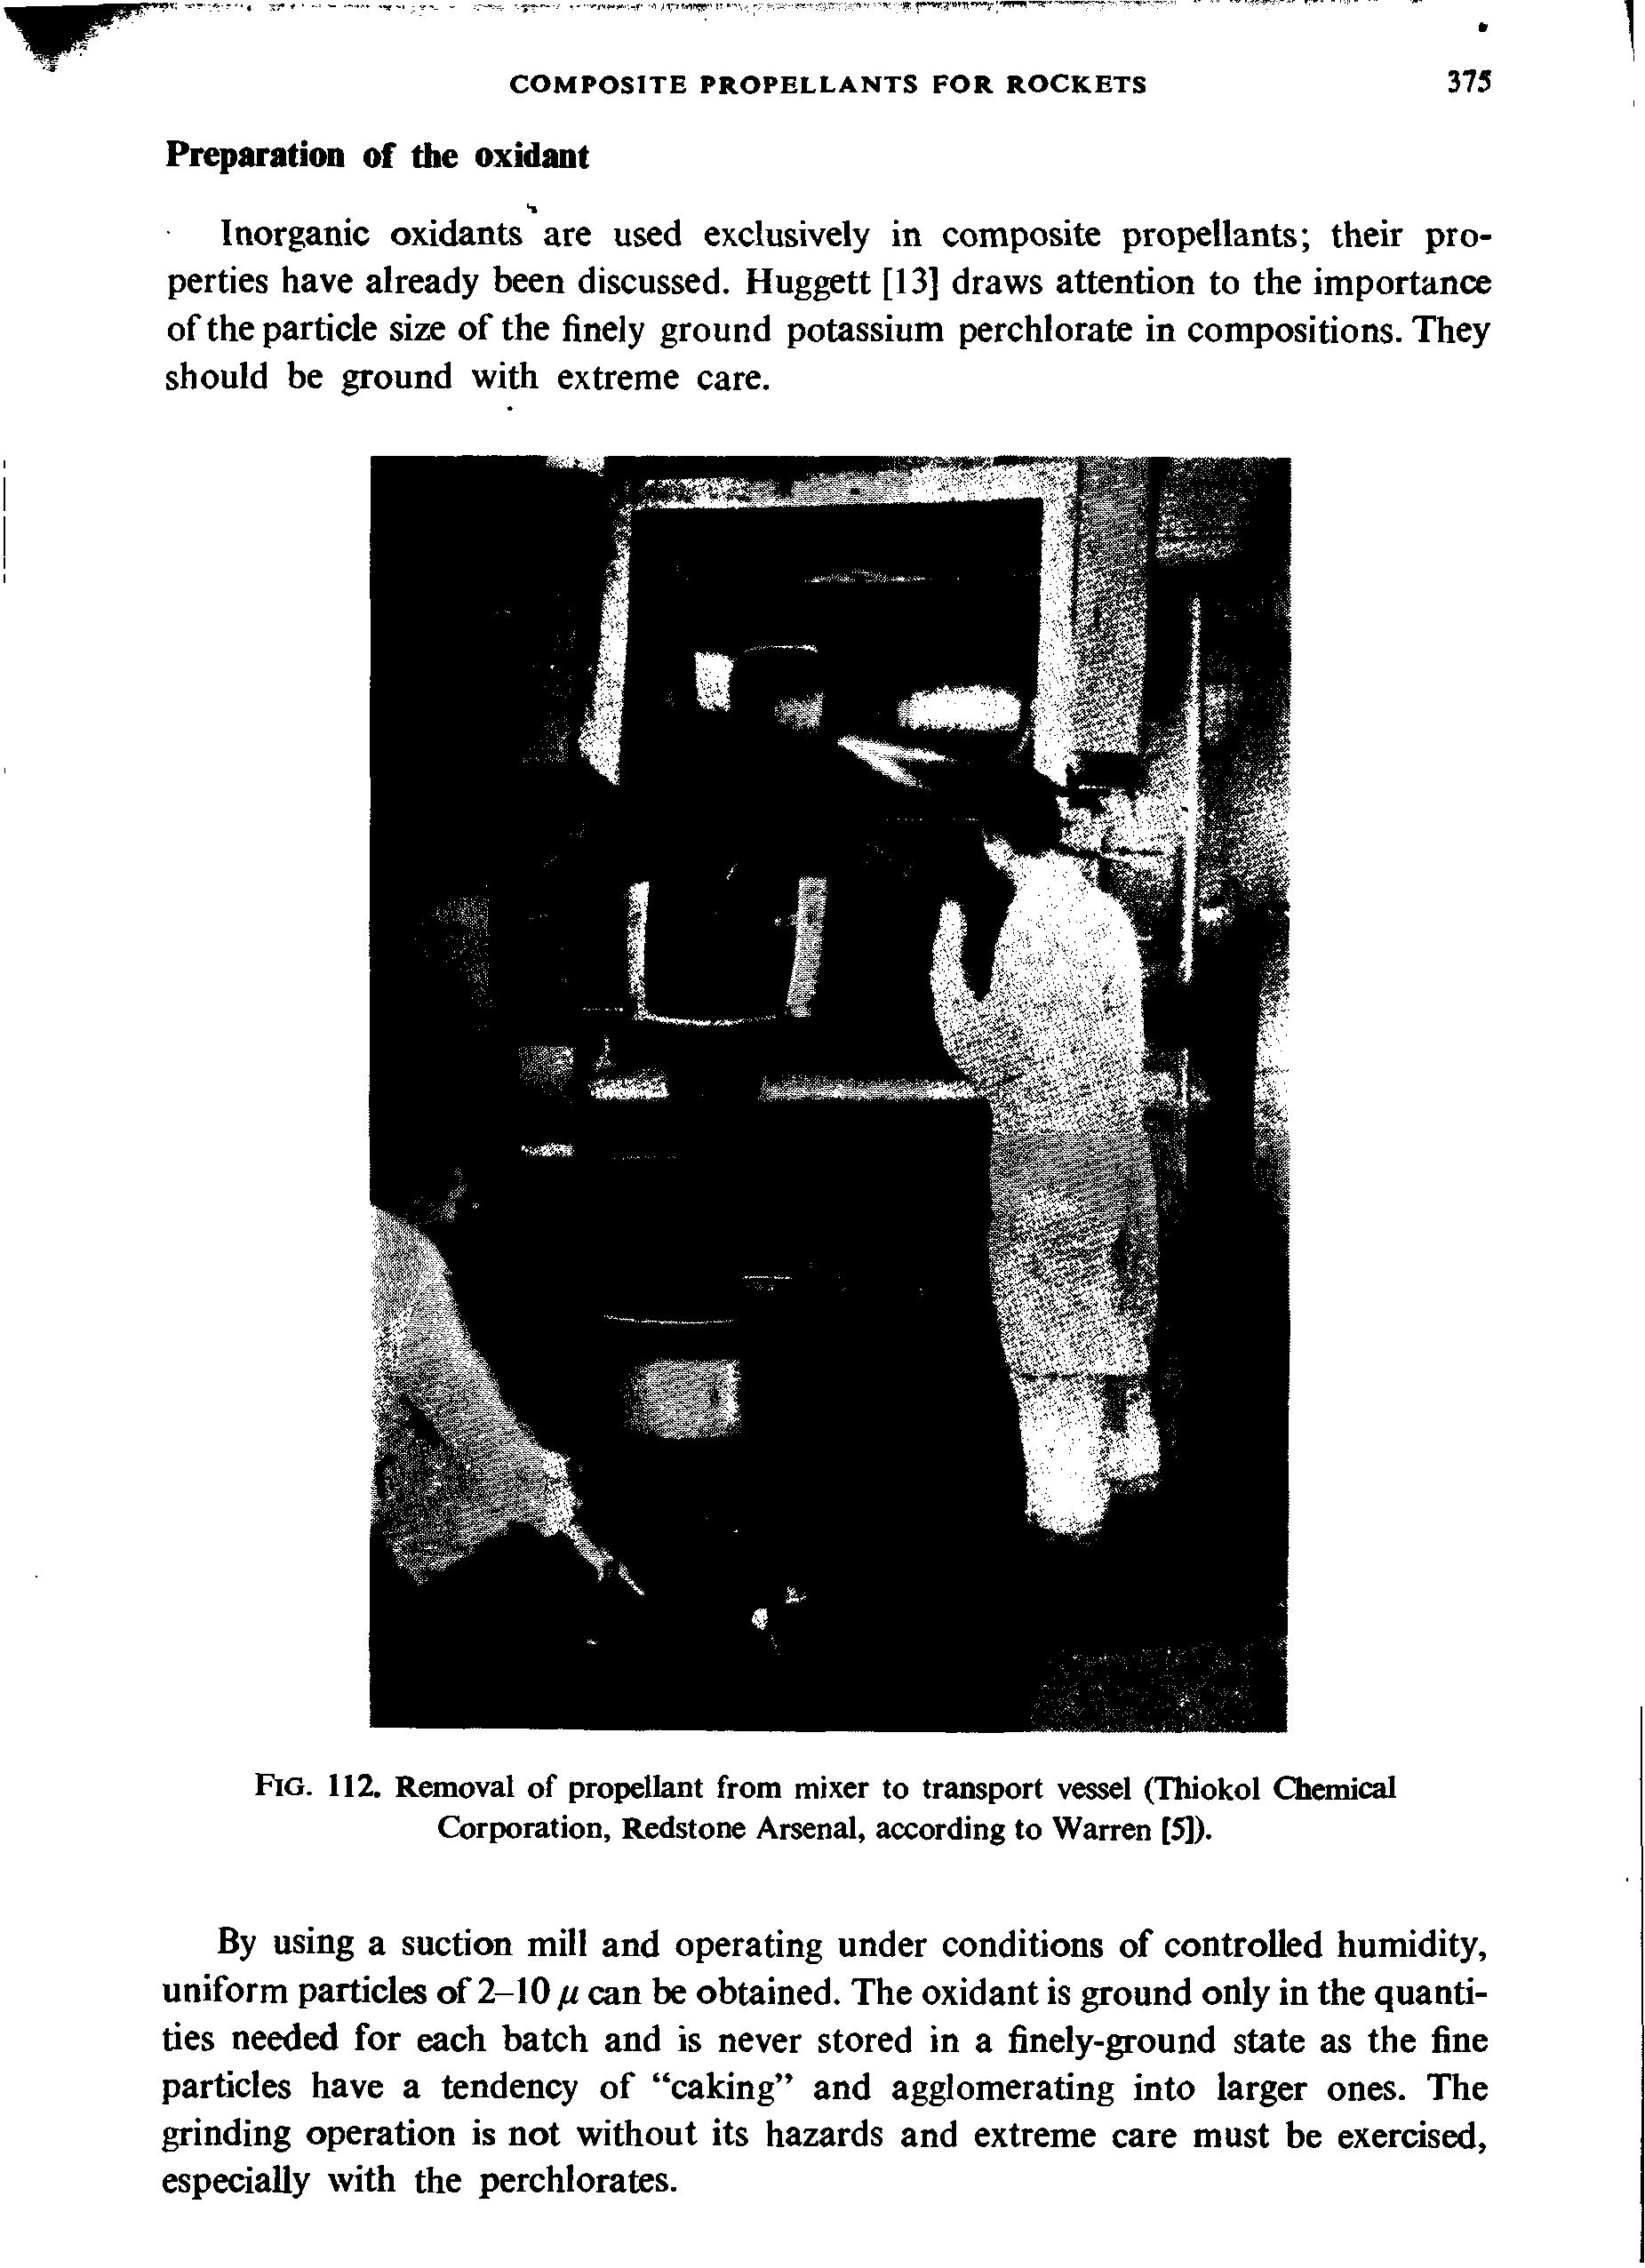 Fig. 112. Removal of propellant from mixer to transport vessel (Thiokol Chemical Corporation, Redstone Arsenal, according to Warren [5]).